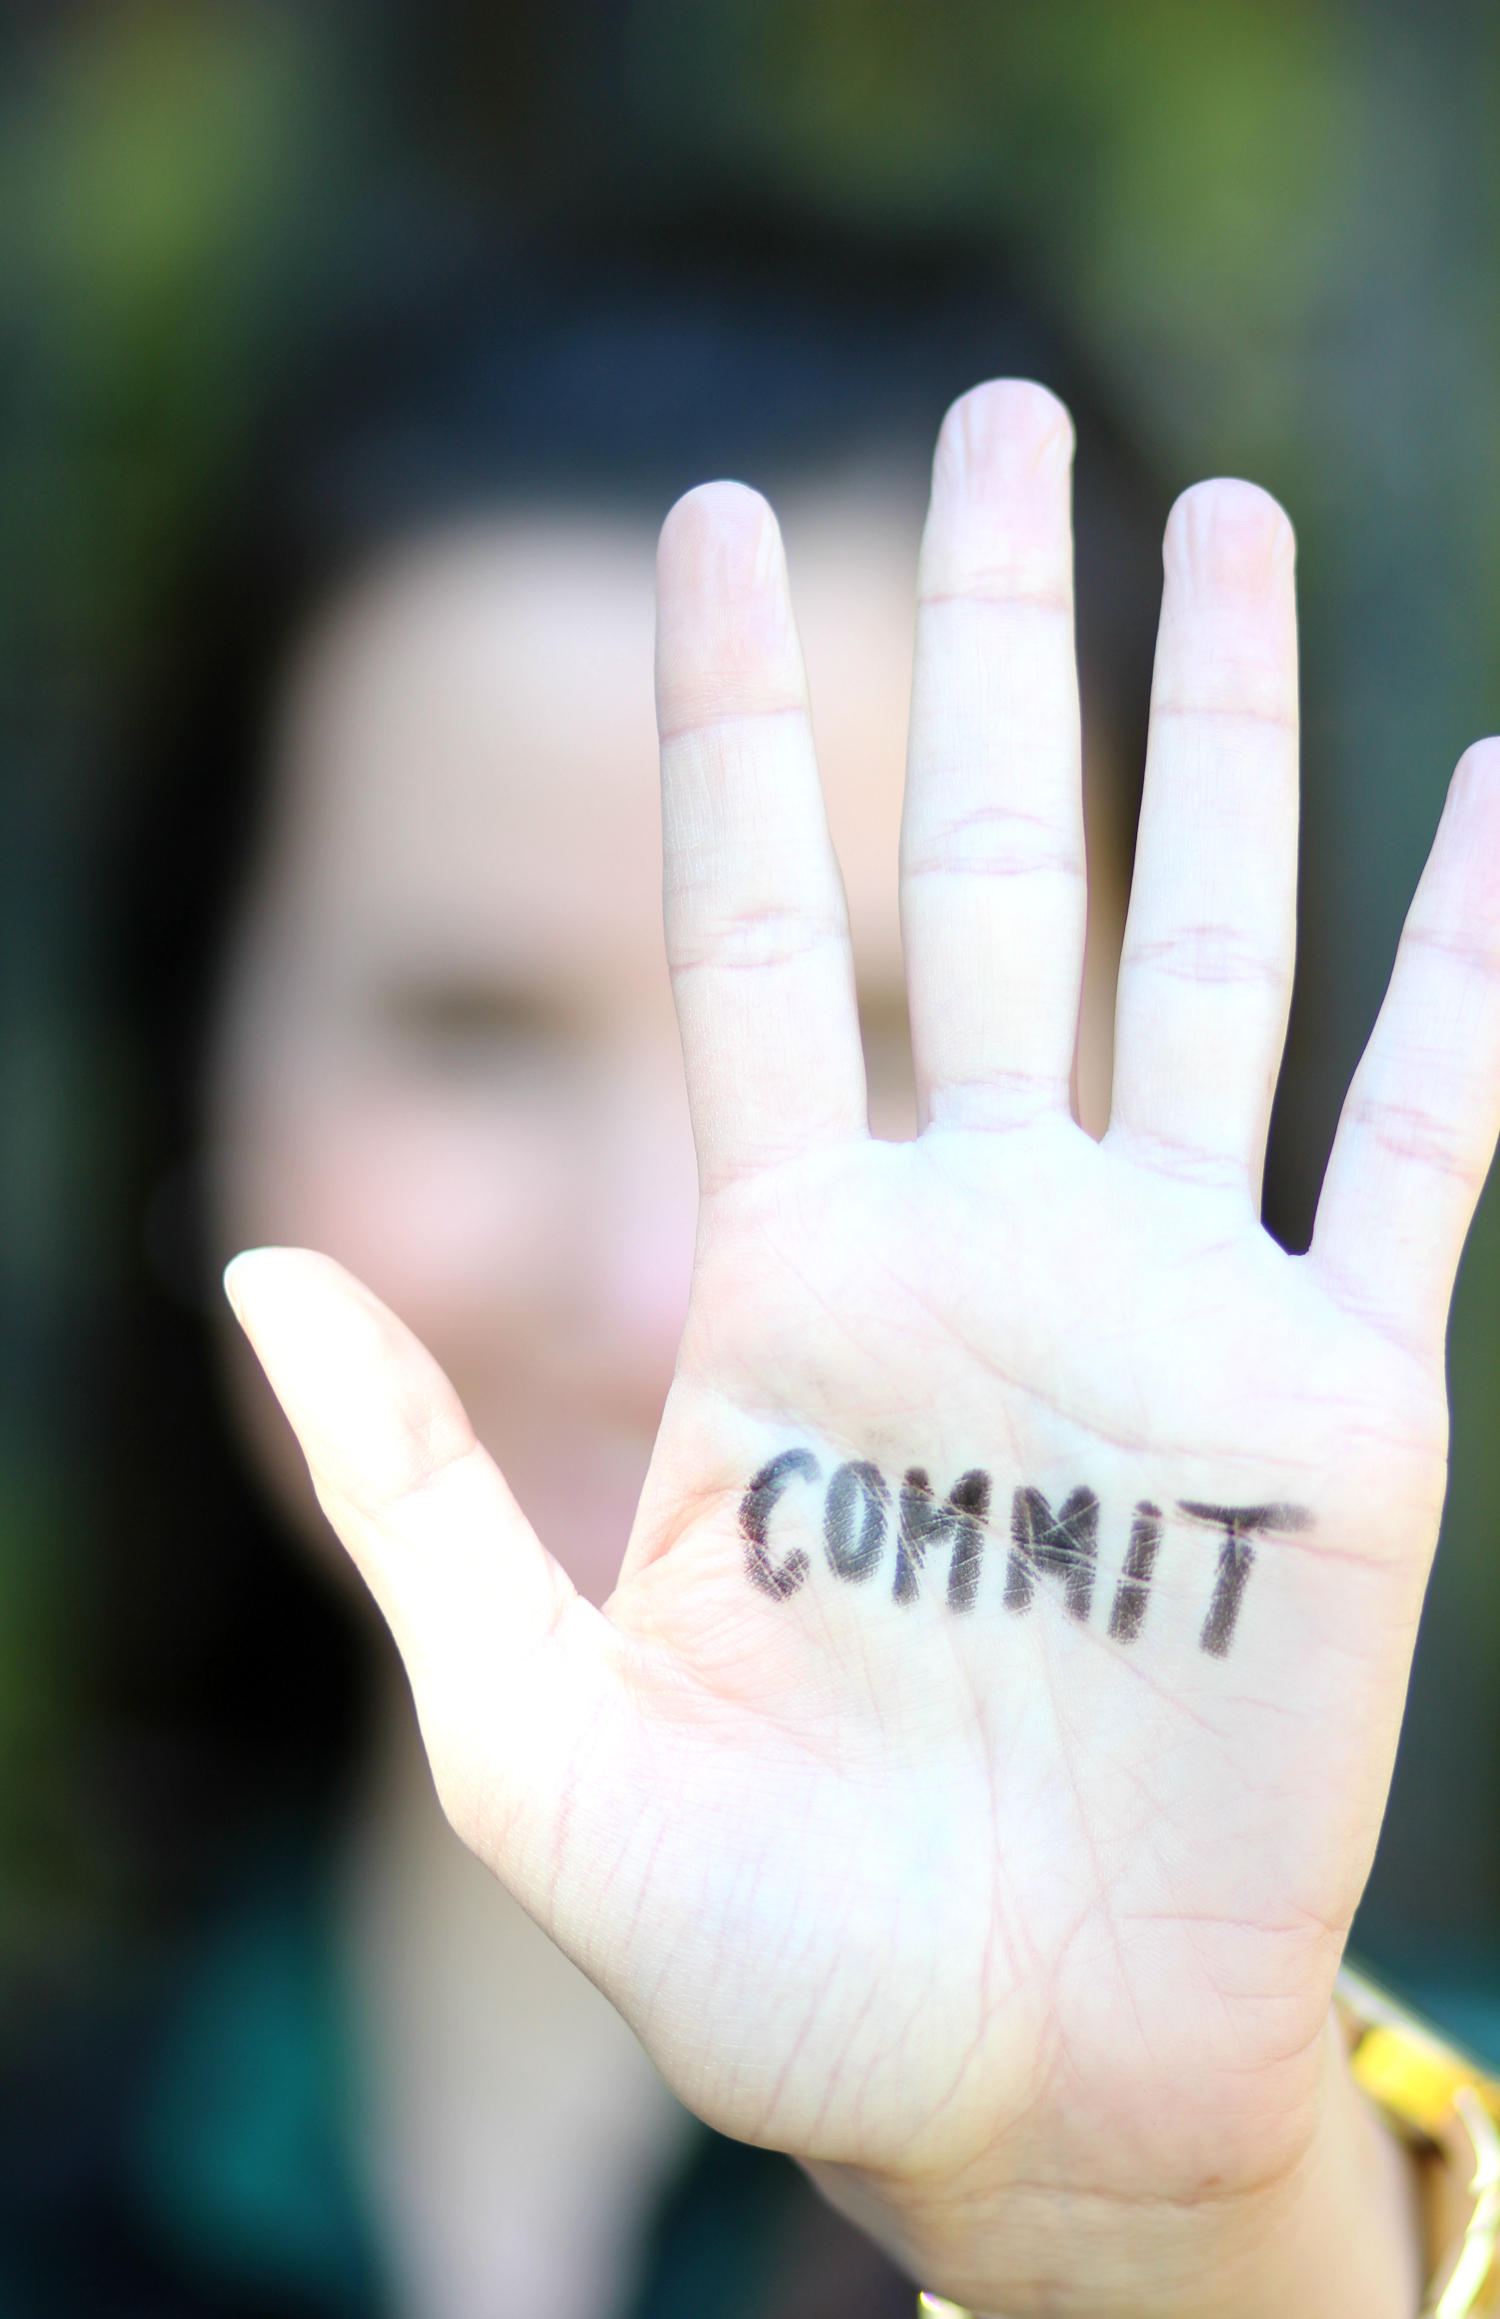 Joining the Commit Campaign for Do Good Week